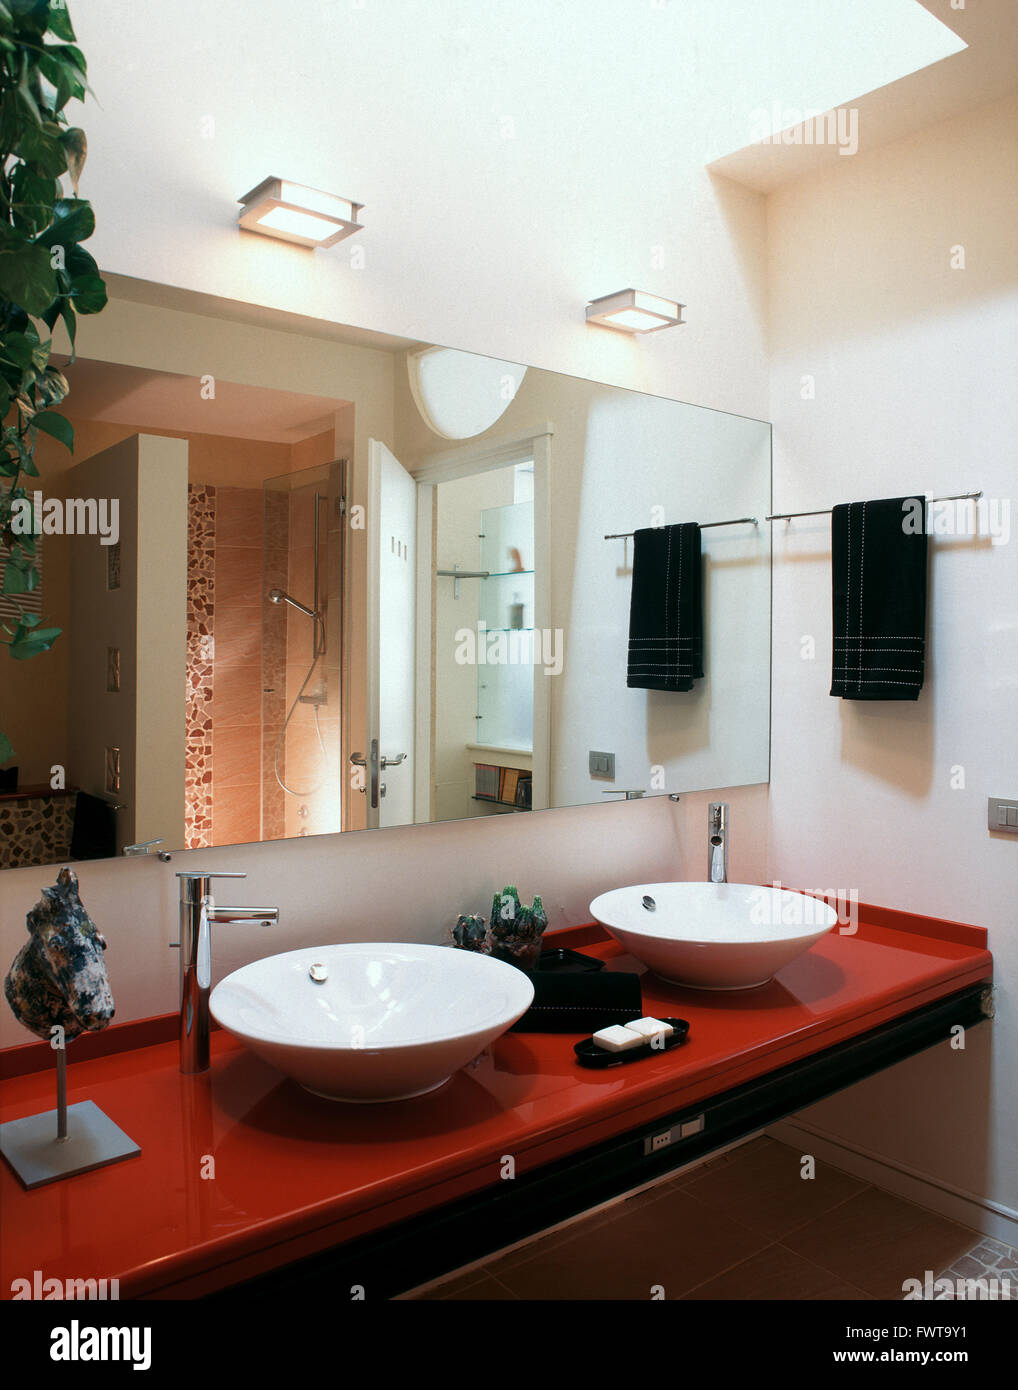 two washbasin on the red worktop in the modern bathroom Stock Photo